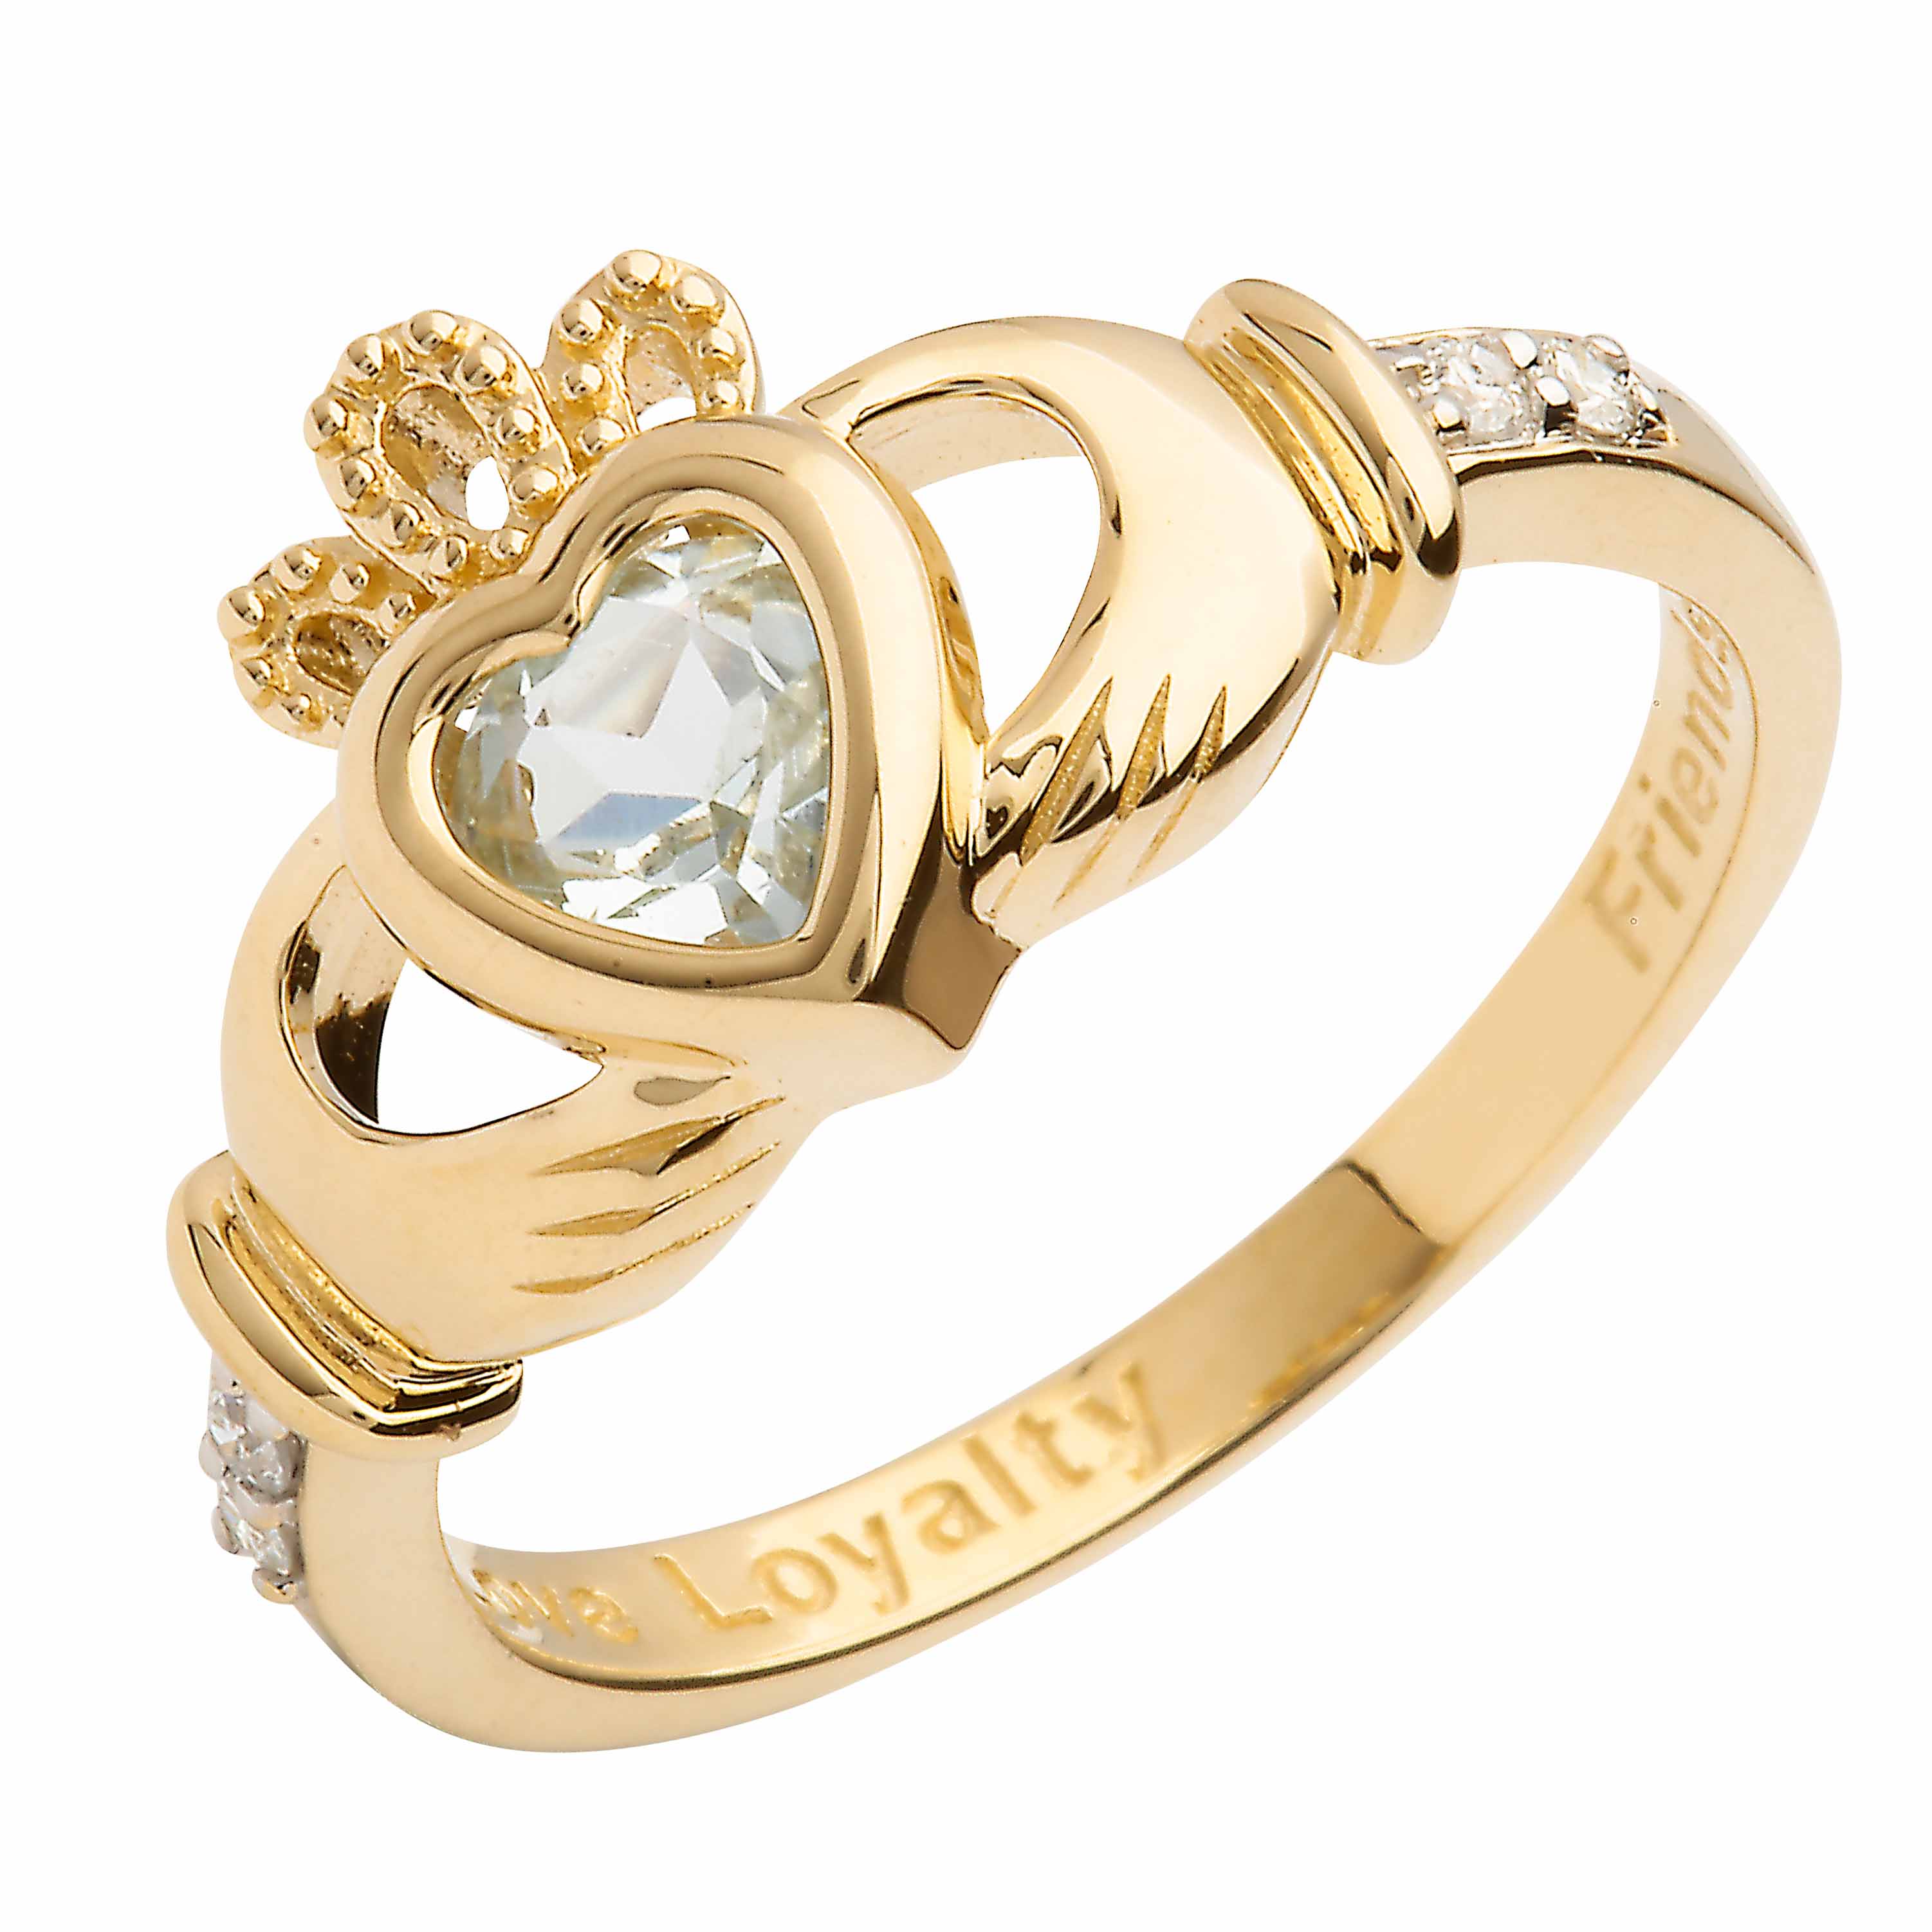 Loyalty Love Engagement 10 K Yellow Gold Promise Marriage Friendship Celtic Knot Claddagh Ring